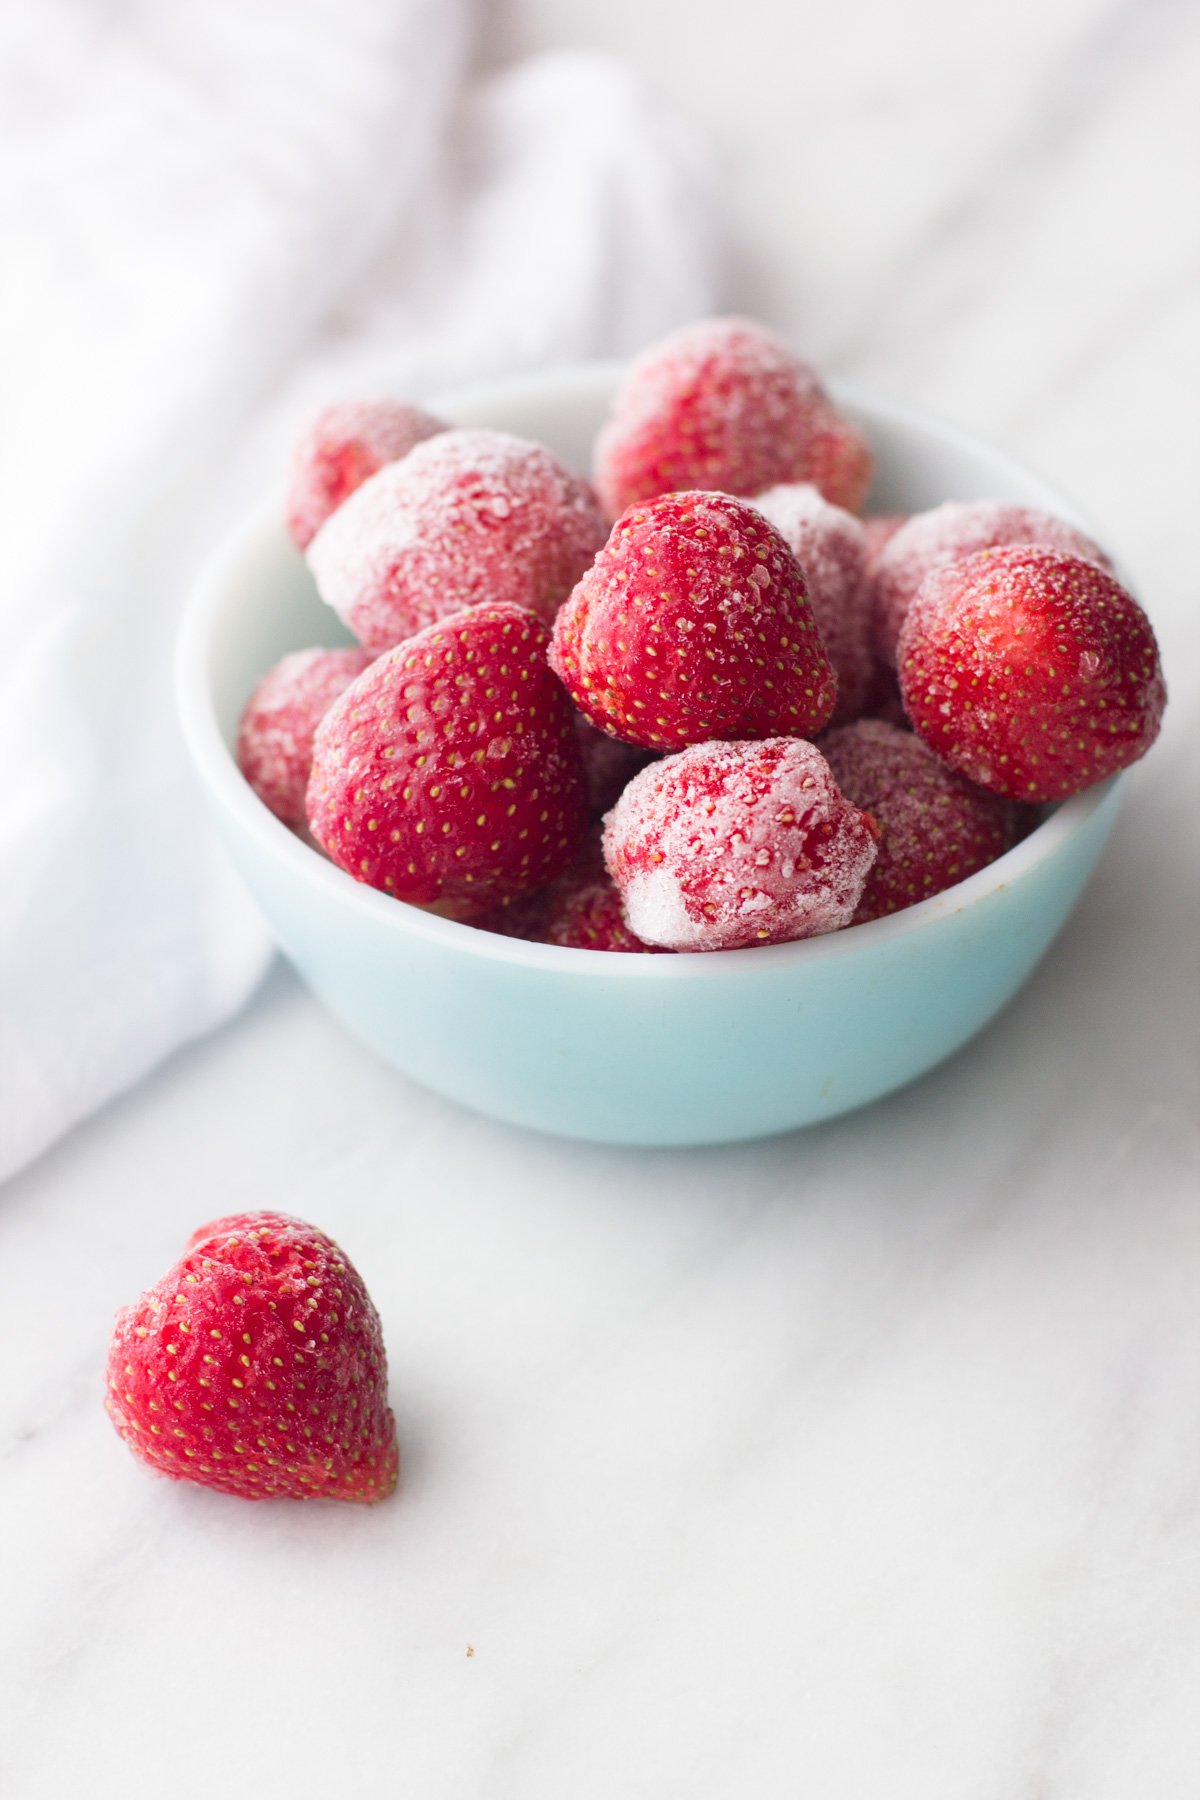 Frozen strawberries piled high in a a bowl with one berry on the counter in front.